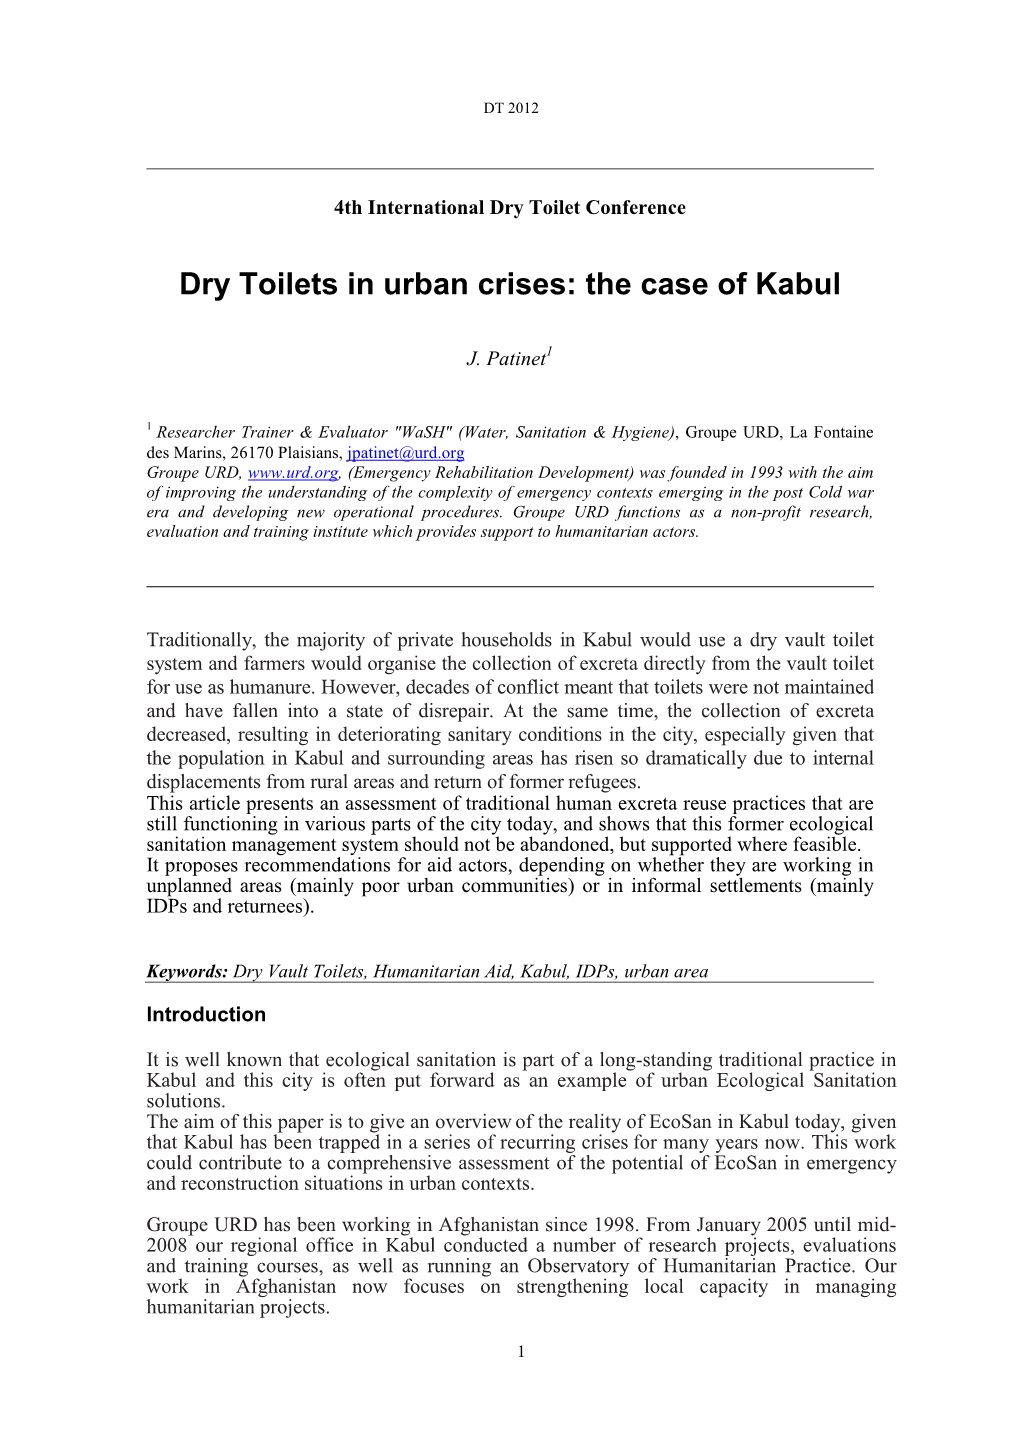 Dry Toilets in Urban Crises: the Case of Kabul